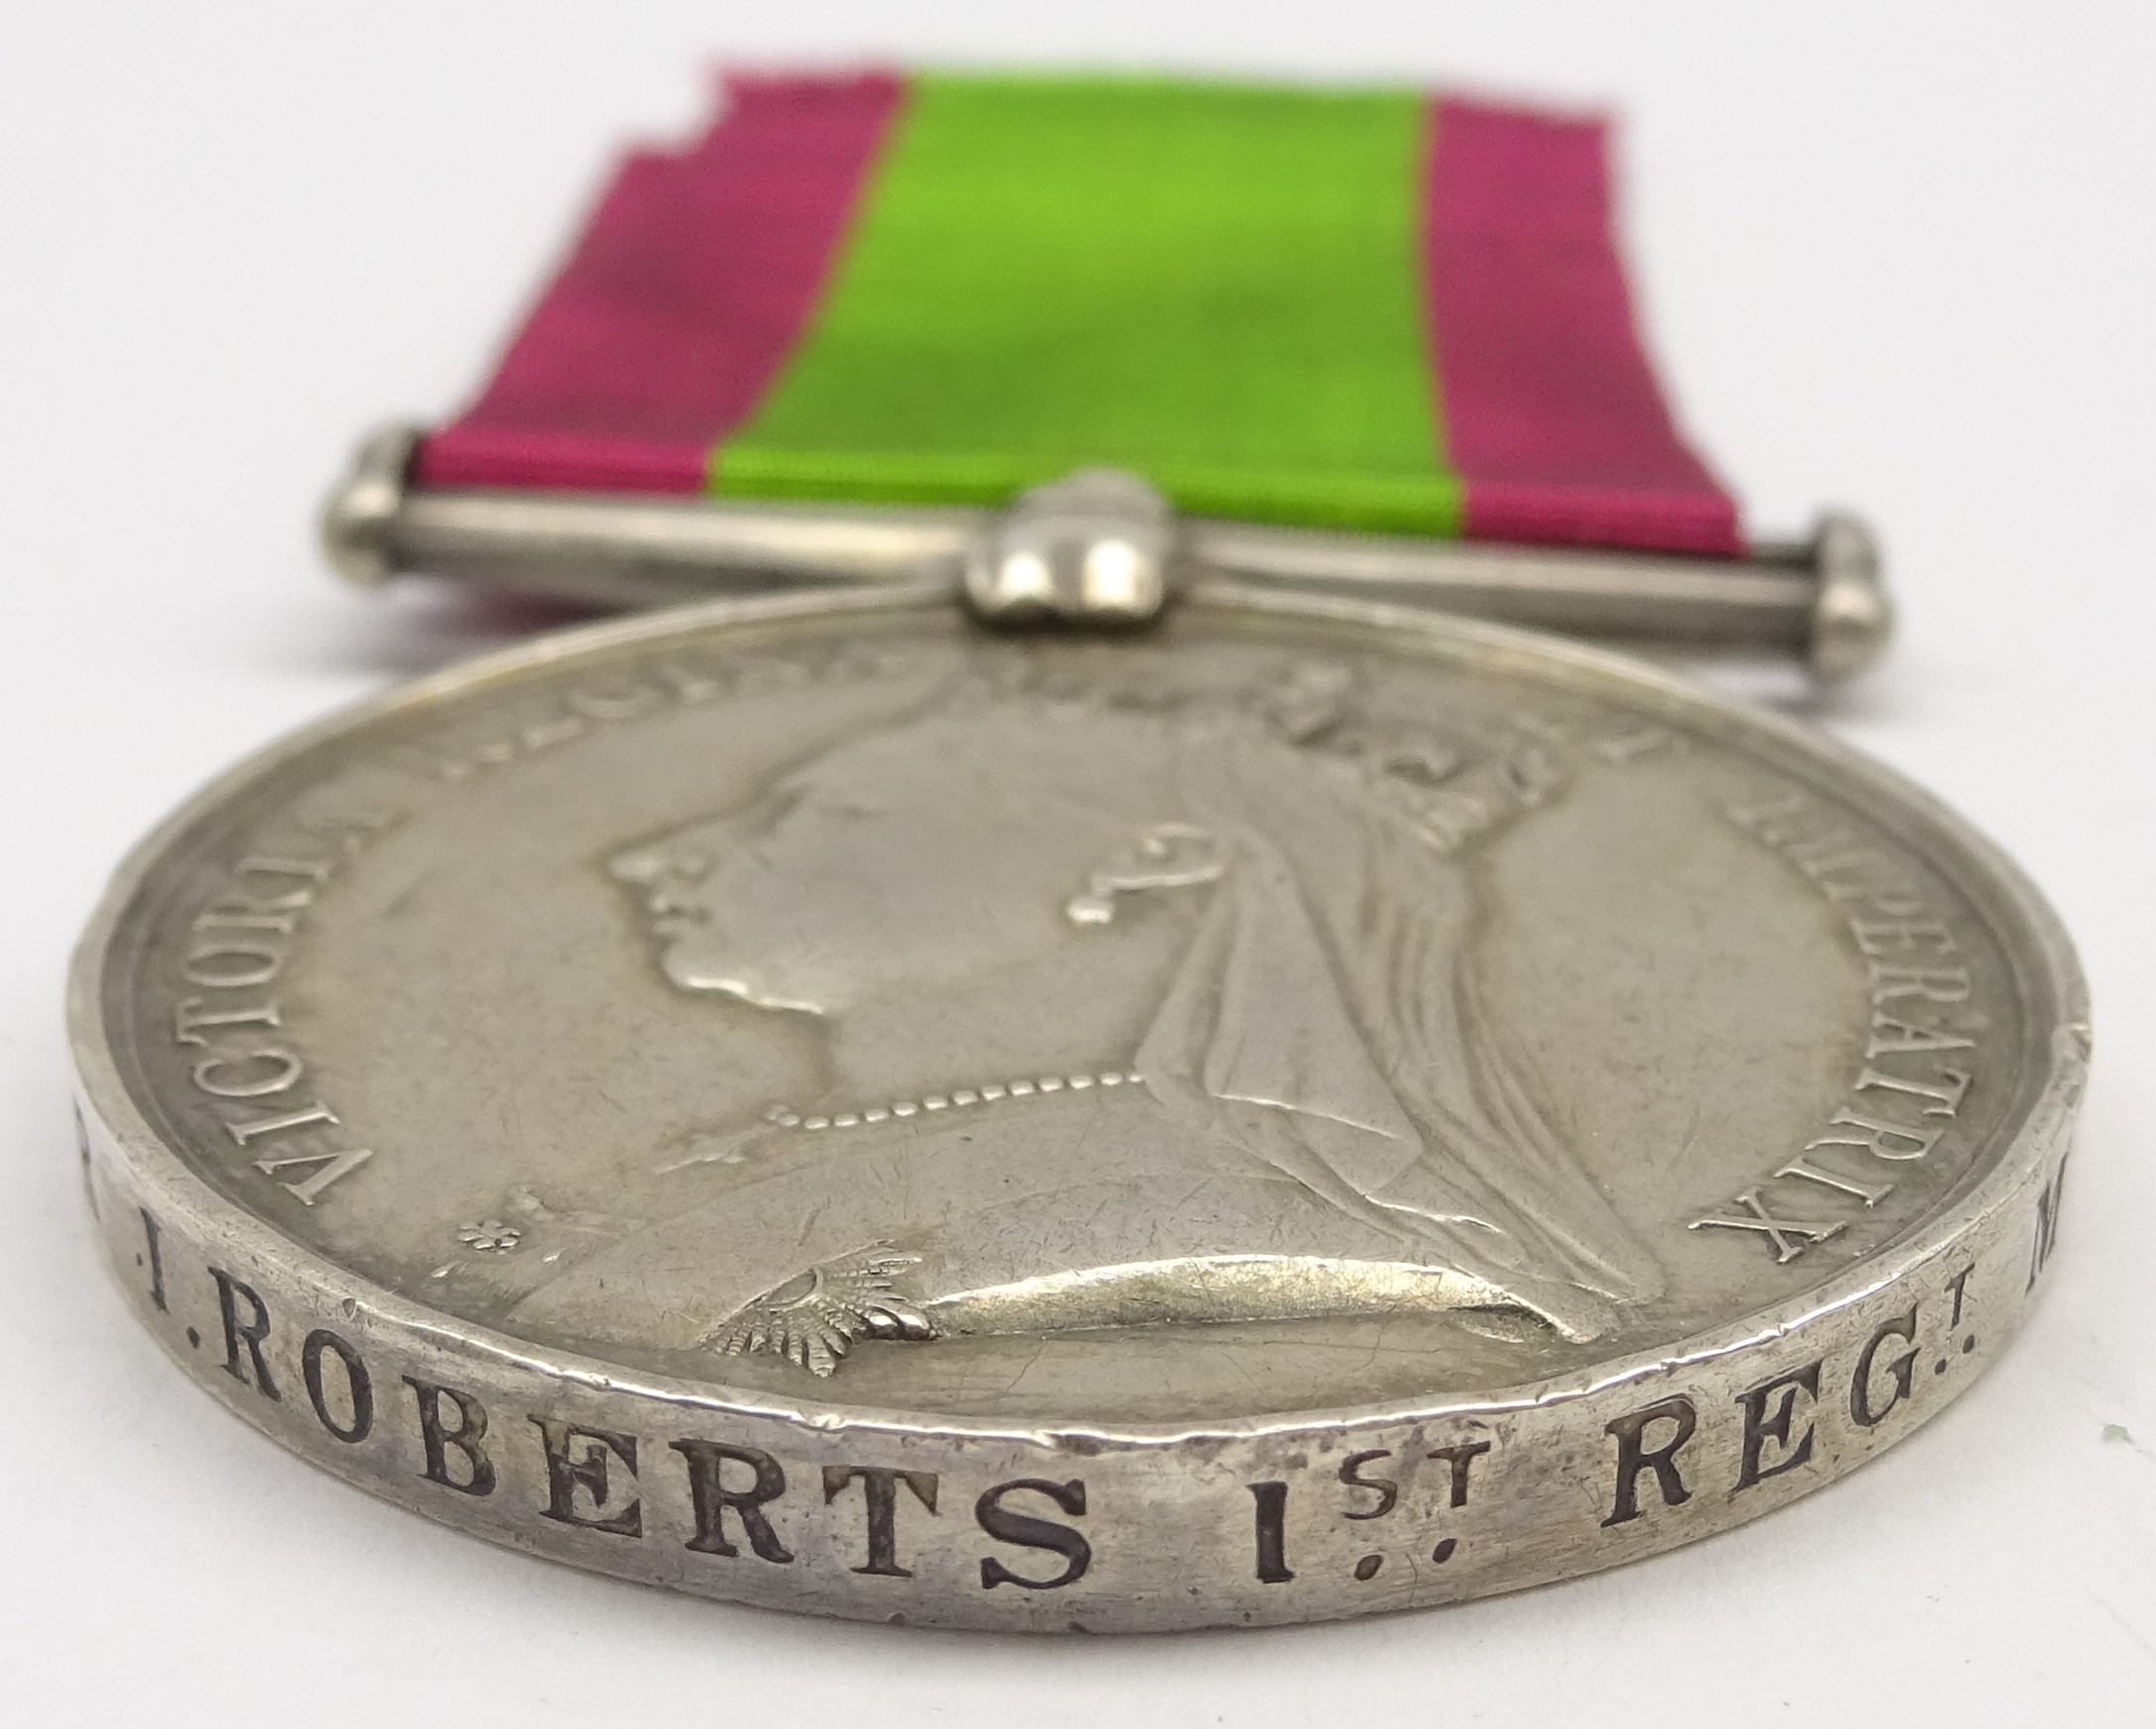 Victorian Afghanistan medal awarded to Farrier I. Roberts 1st Regt. M.L.Cavy. - Image 3 of 3